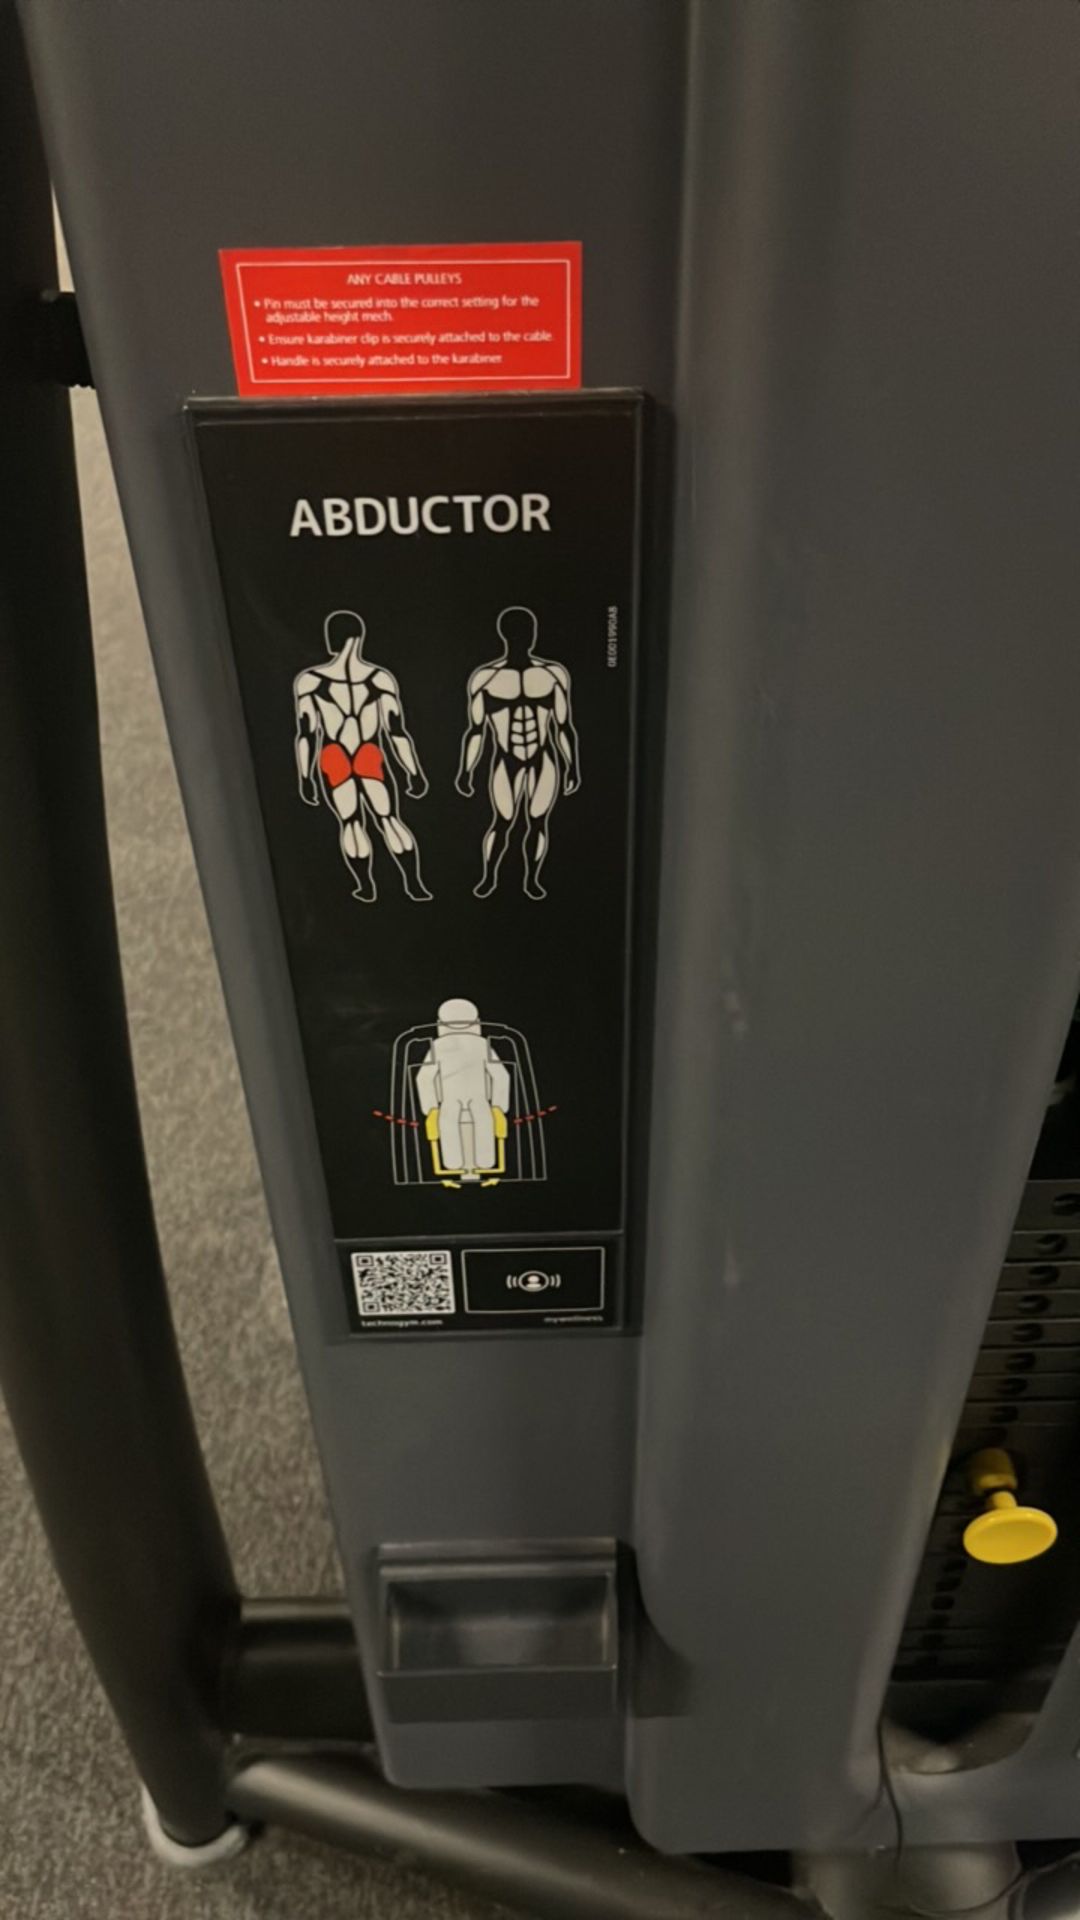 Abductor - Image 2 of 5